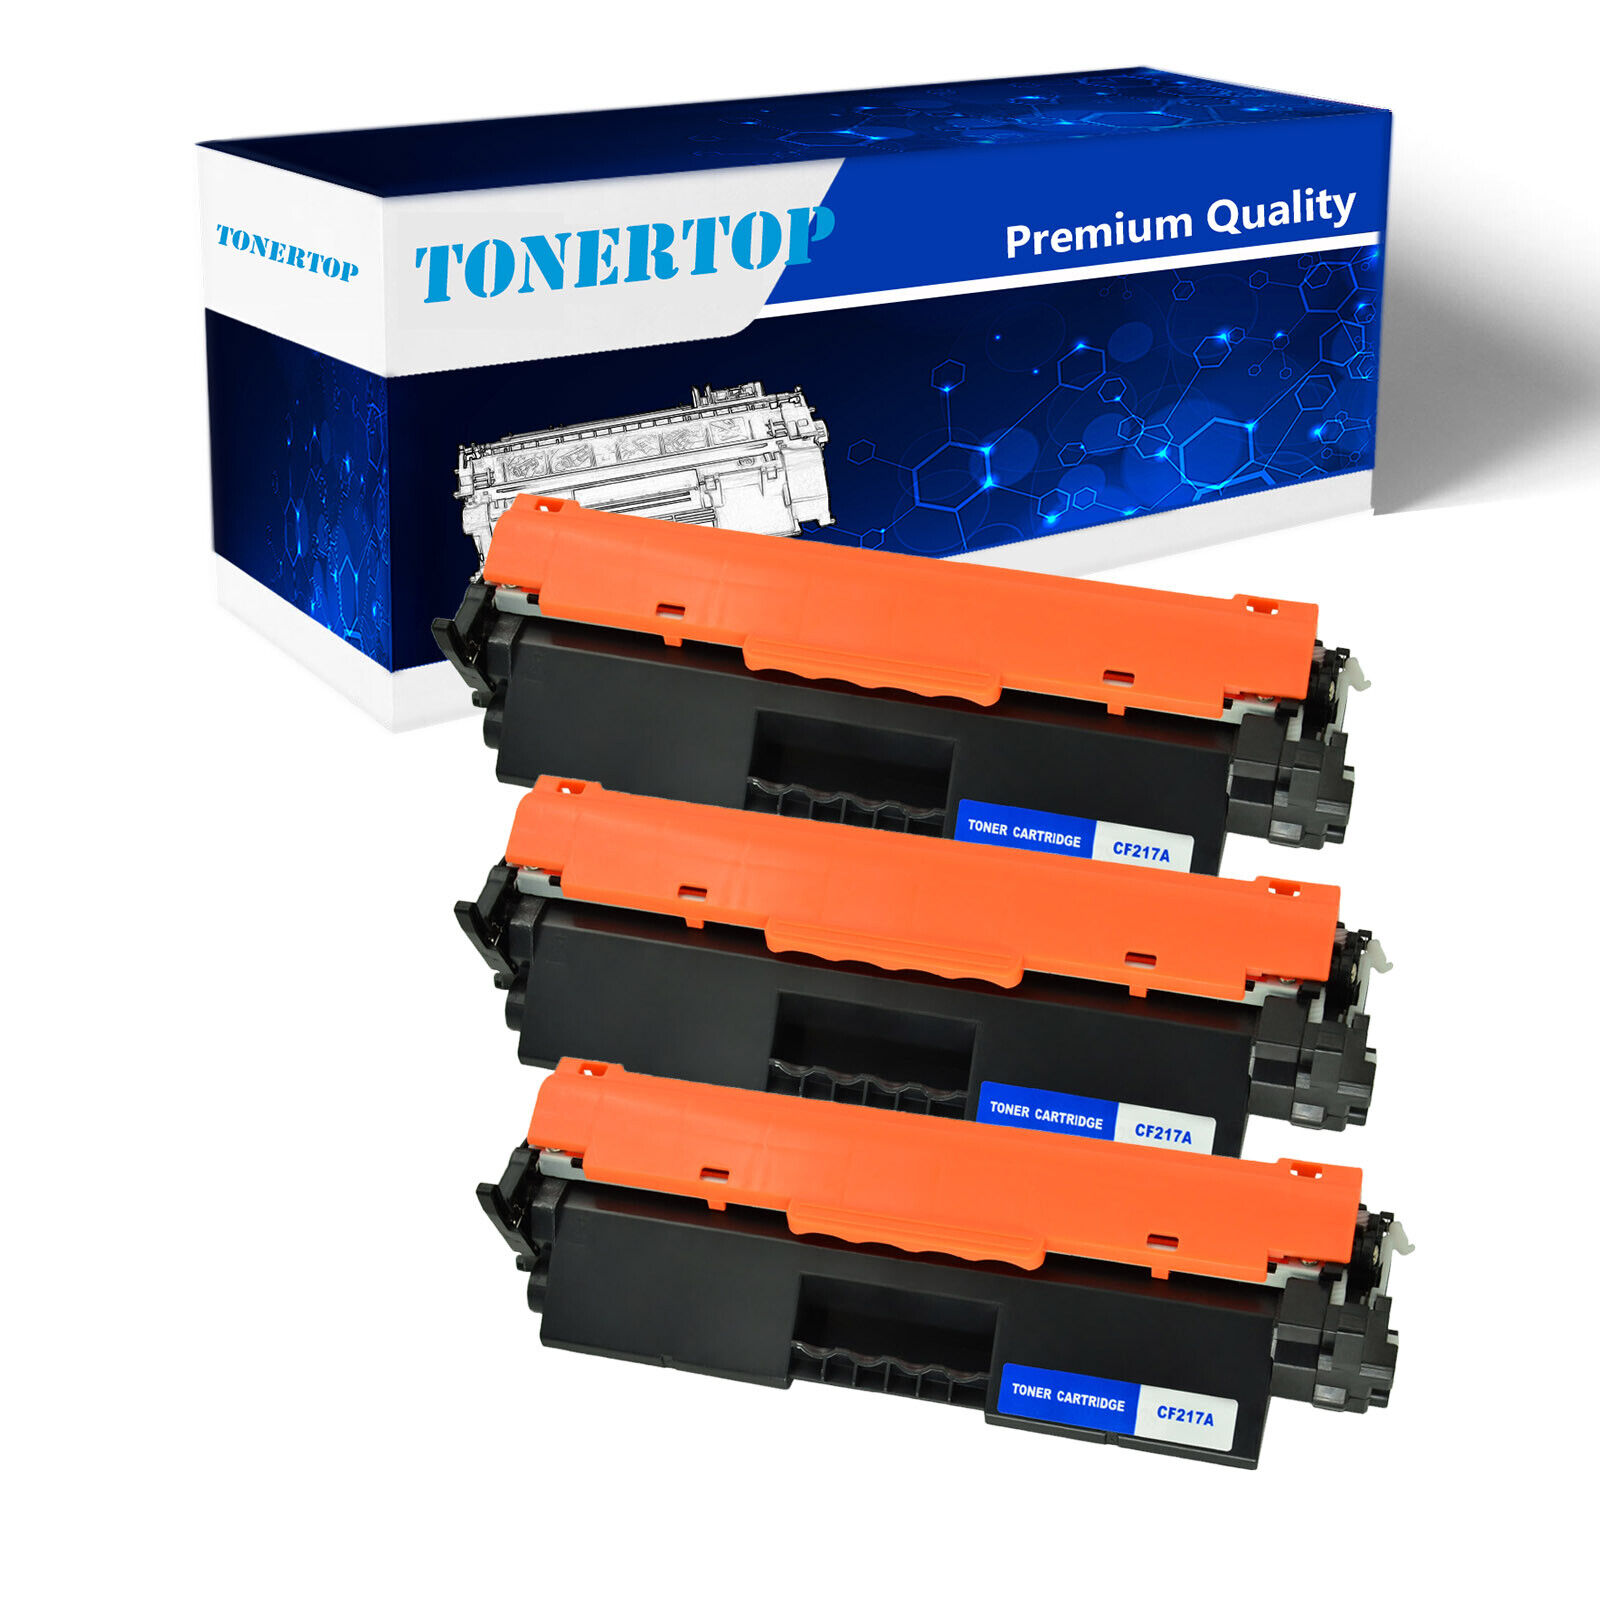 3PK CF217A 17A Toner Cartridge Fit for HP LaserJet M102a M102w Pro MFP With Chip